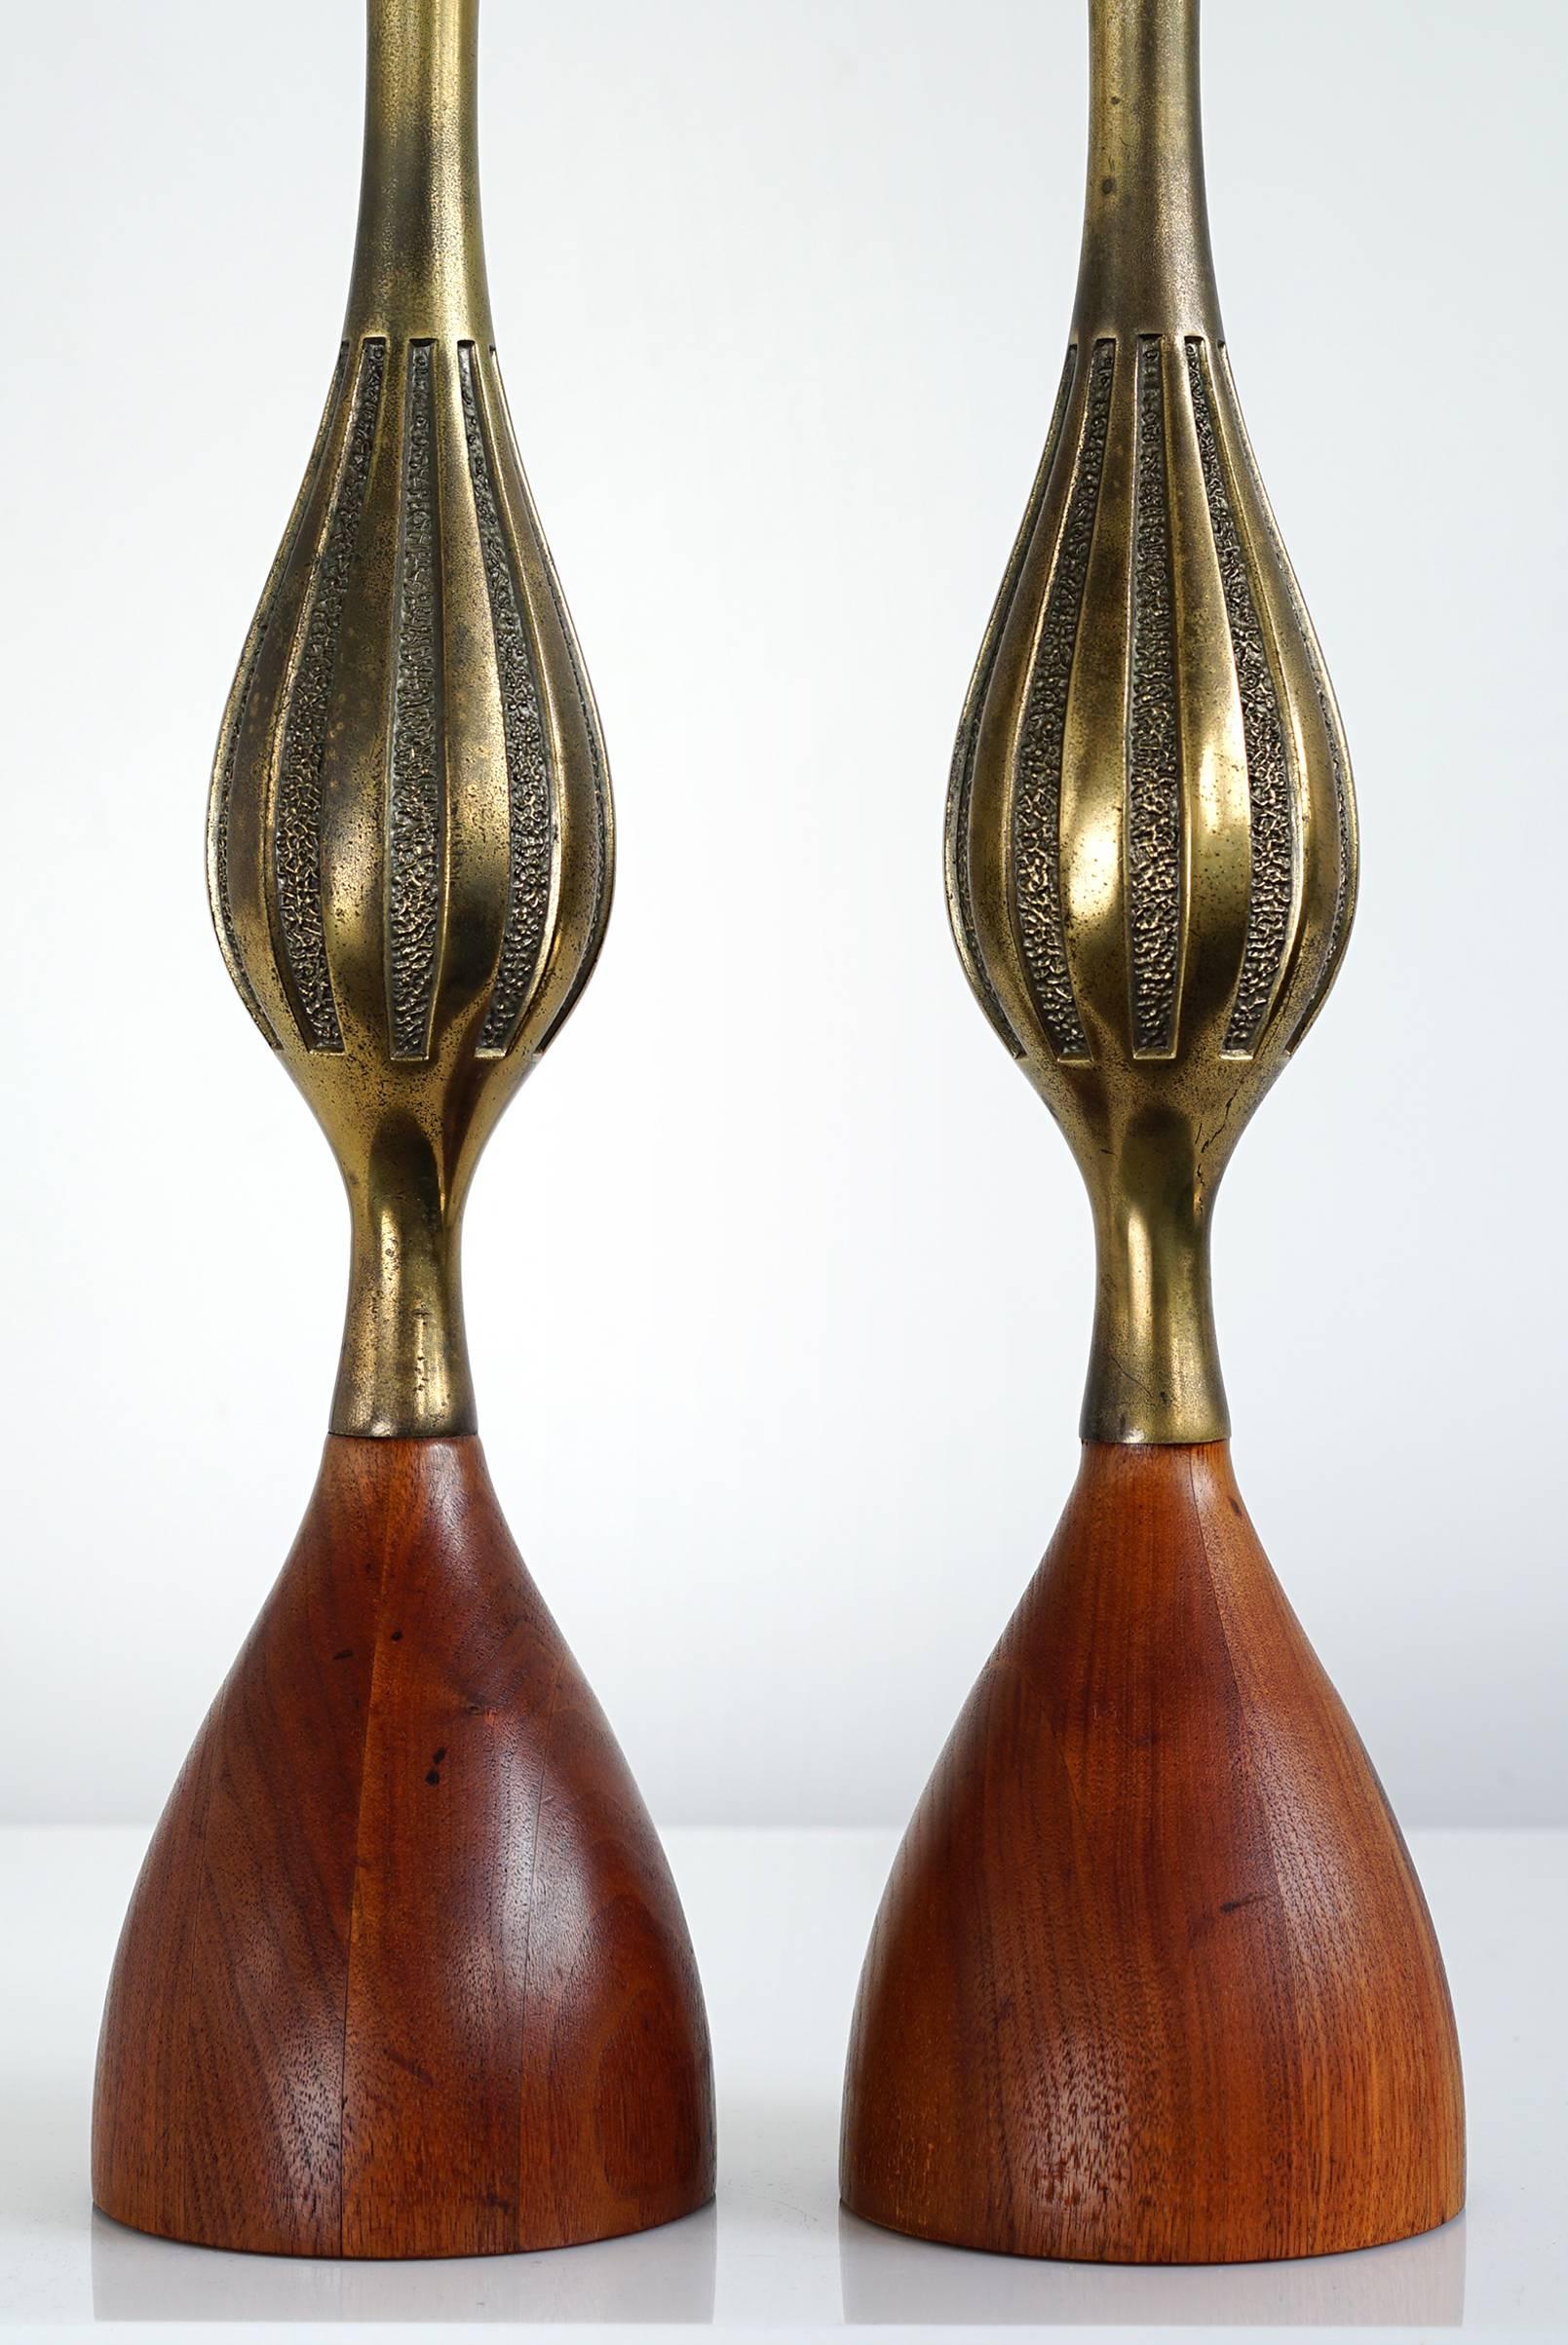 Tall, sinuous sculptural form in brass and stacked walnut. Original finials and harps. Handsome pair with lovely patina.

Measures: Height to bottom of socket 21.5 inches
total height 32 inches
diameter 5 inches.